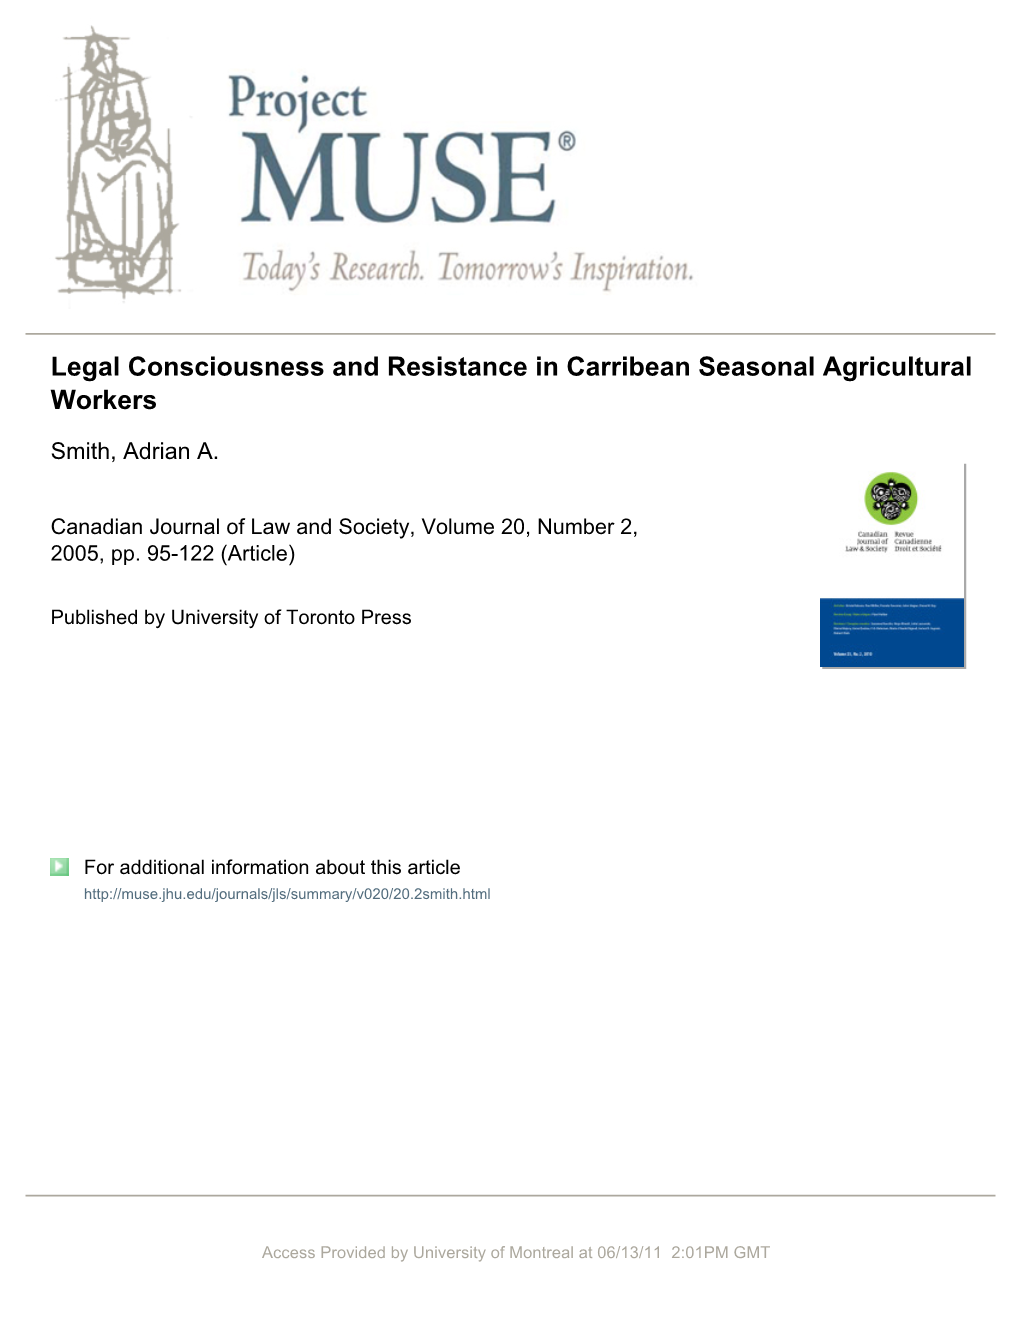 Legal Consciousness and Resistance in Carribean Seasonal Agricultural Workers